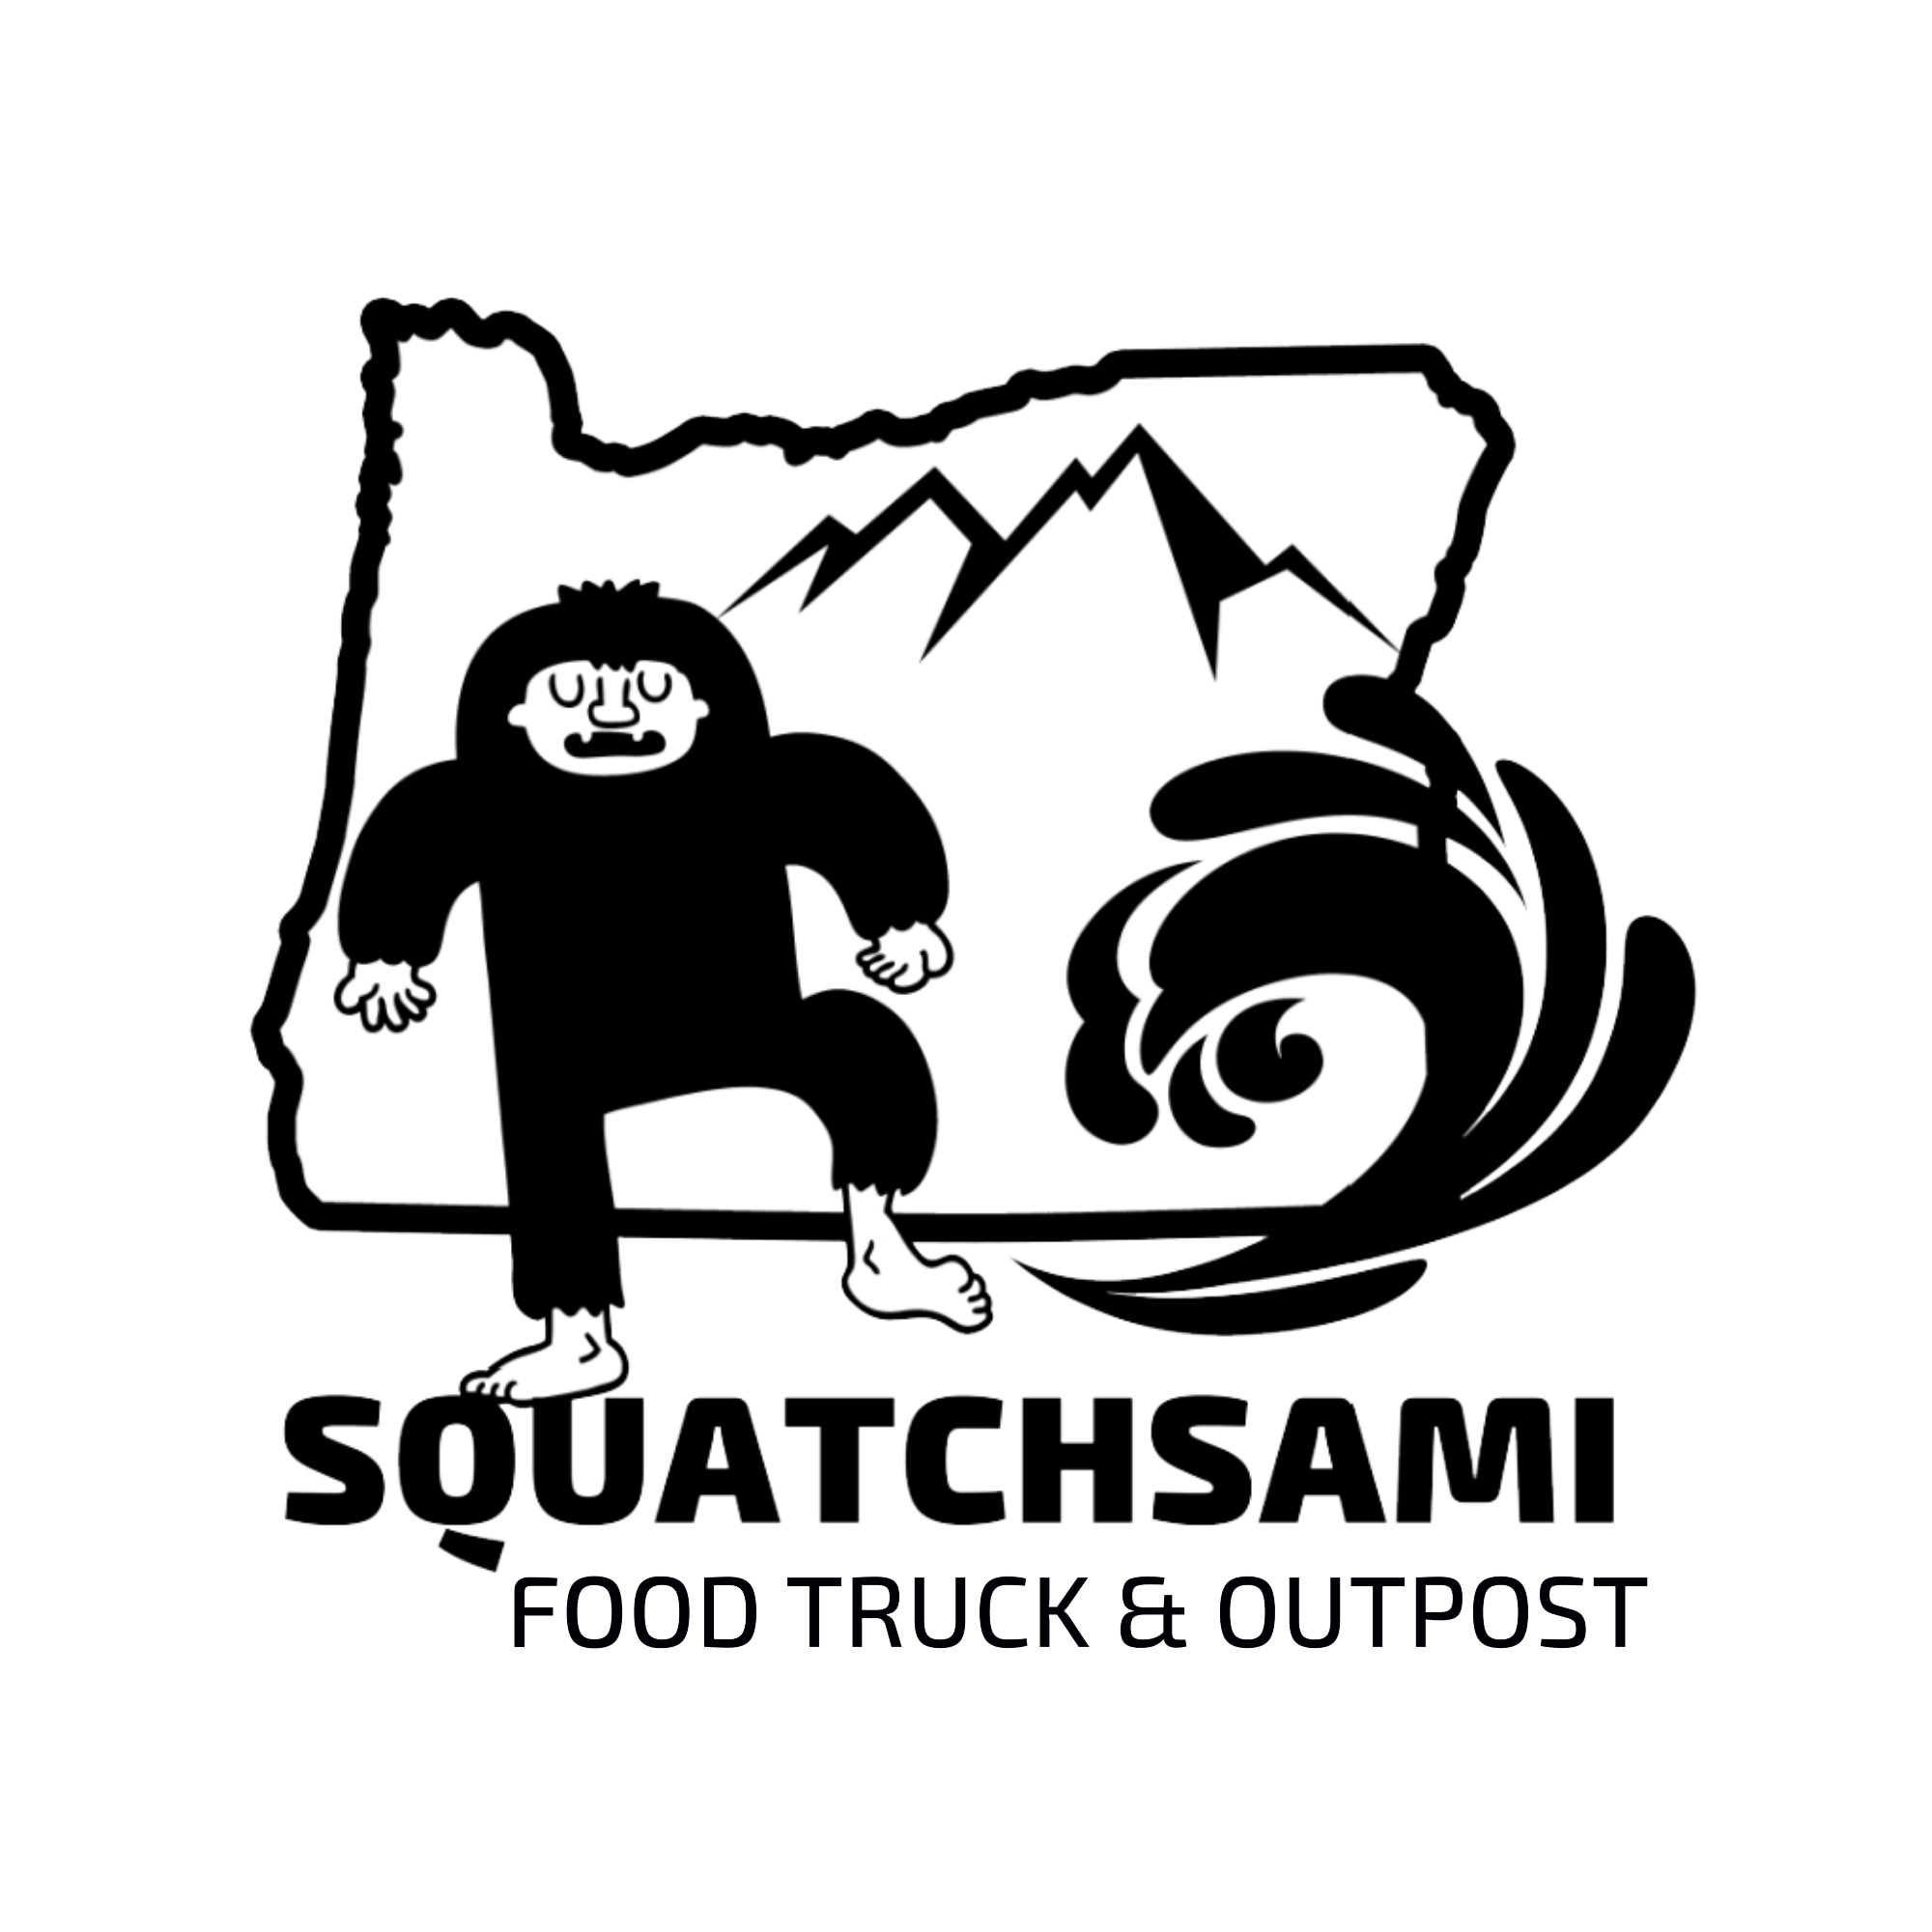 Logo Squatchsami Food Truck and Outpost NEW.jpg